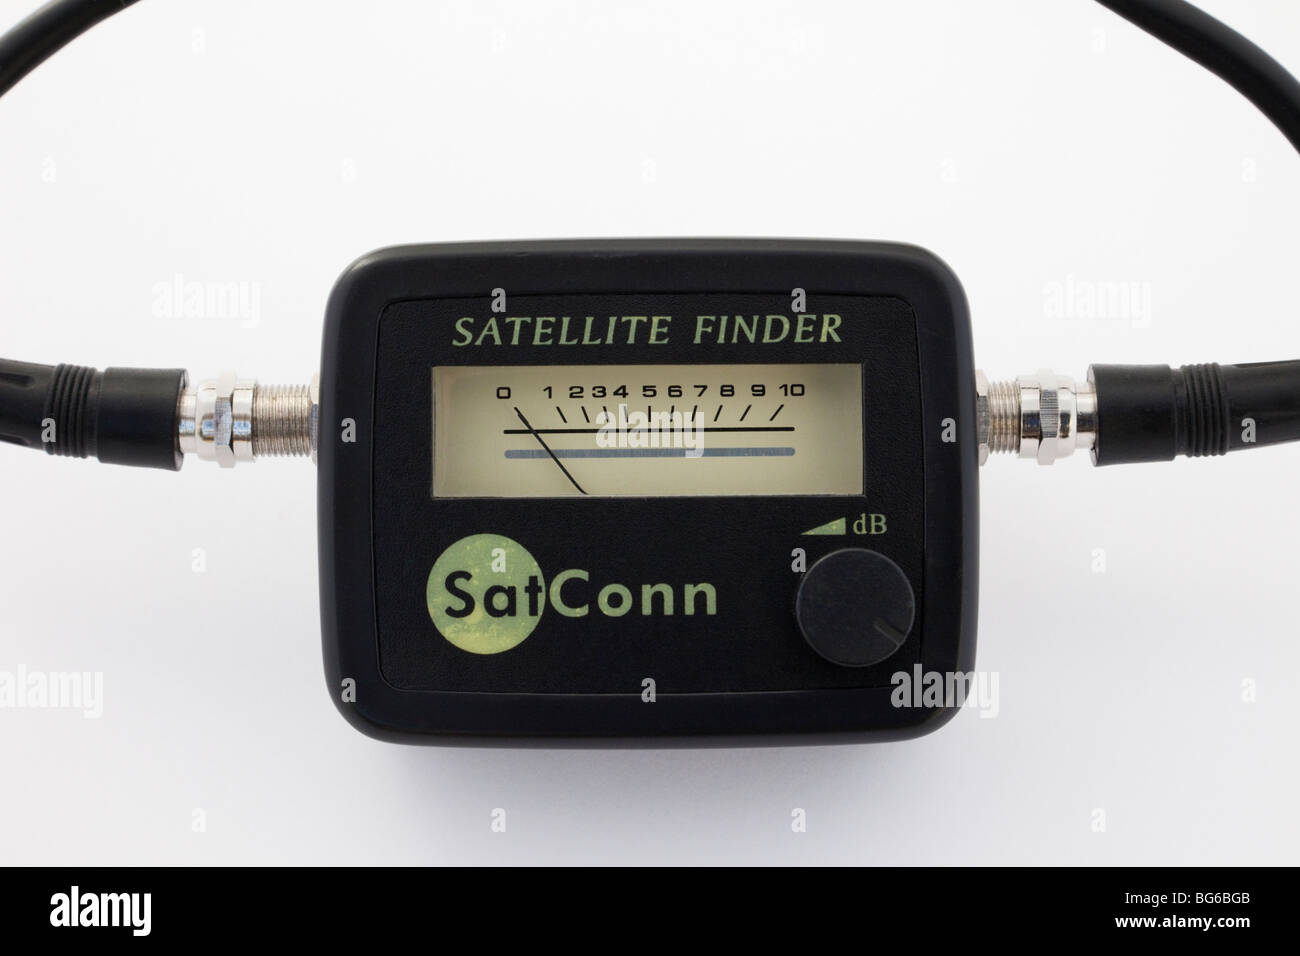 Studio still life. SatConn Satellite finder for measuring signal strength close-up on a white background. Stock Photo